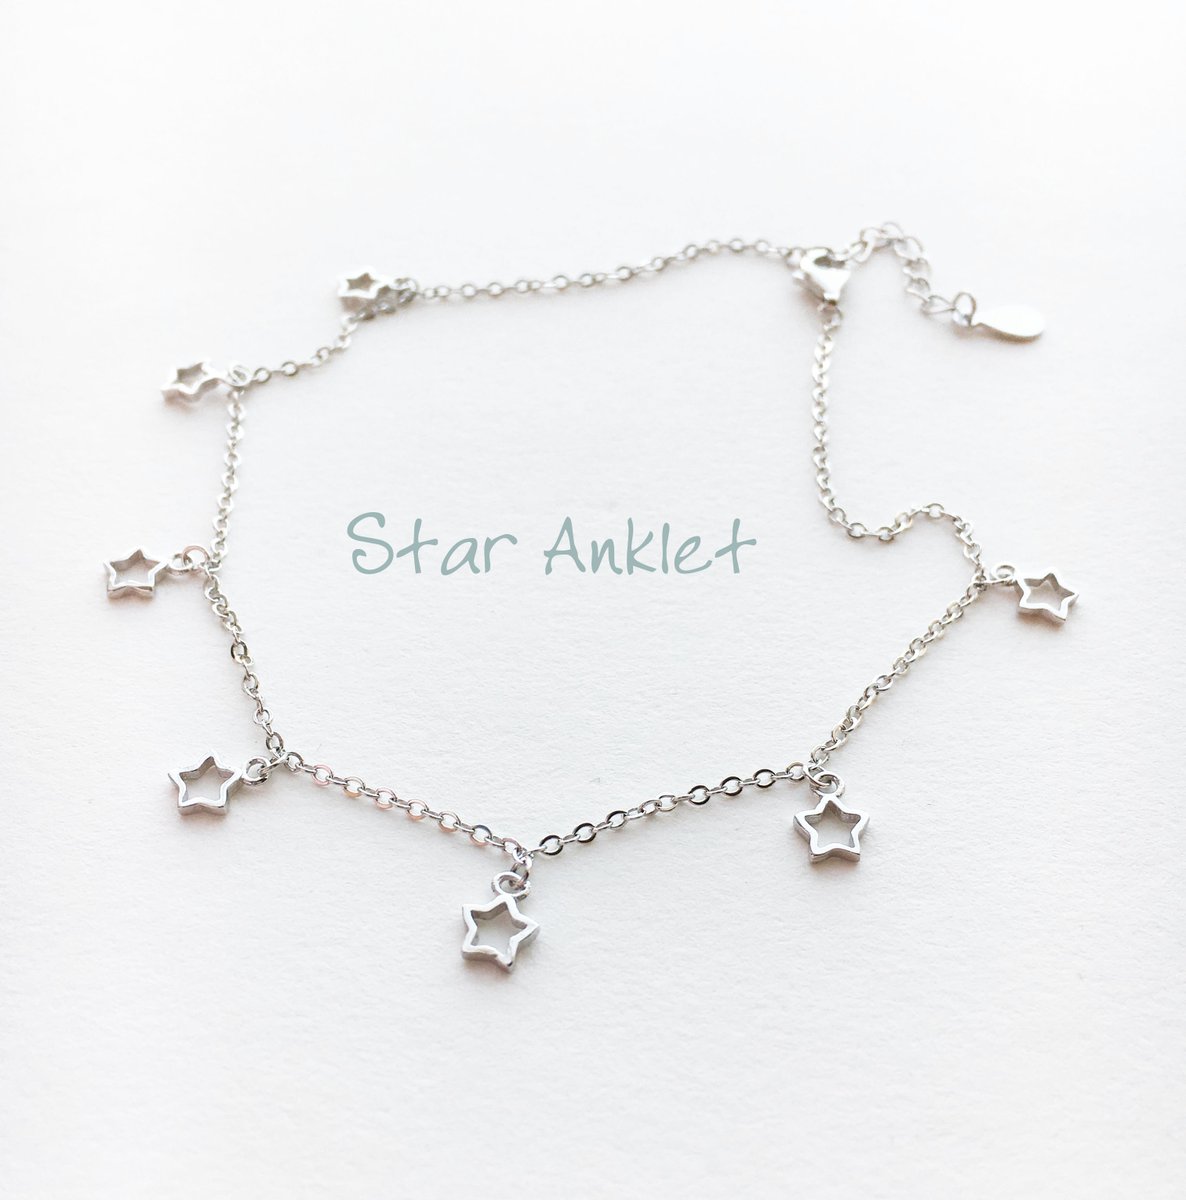 ⋆ Check out this cute star anklet in sterling silver ⋆ etsy.me/2qaBr6y 
#staranklet #anklet #anklebracelet #footjewelry #beachanklet #beachjewelry #summer #readyforsummer #summerjewelry #olizzjewelry #βραχιόλι #star #summerwedding #silveranklet #sterlingsilveranklet